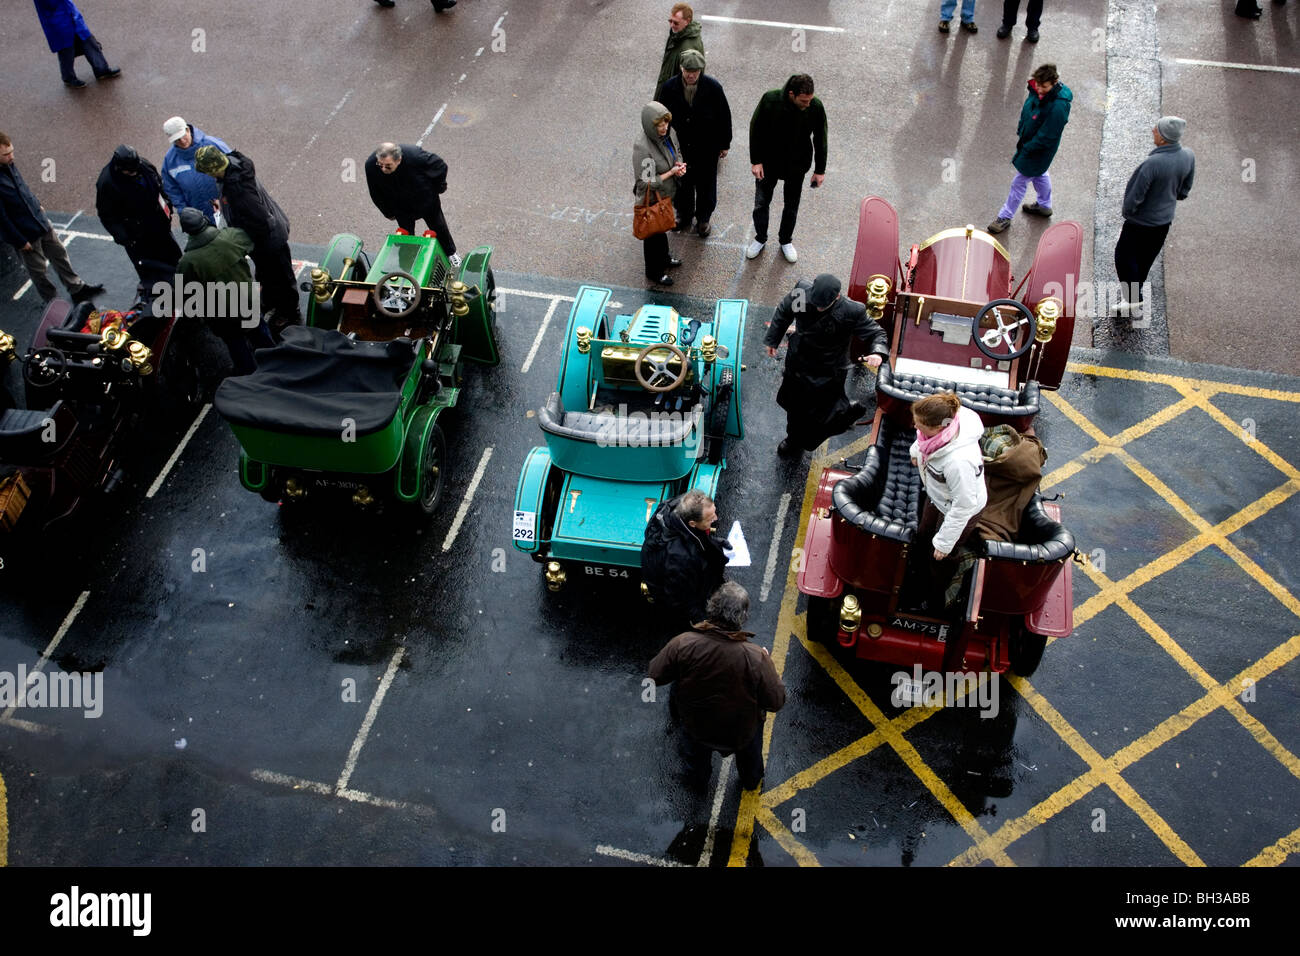 Members of the public inspect old cars during the London to Brighton Veteran Car Run 2009, Brighton, East Sussex, UK. Stock Photo